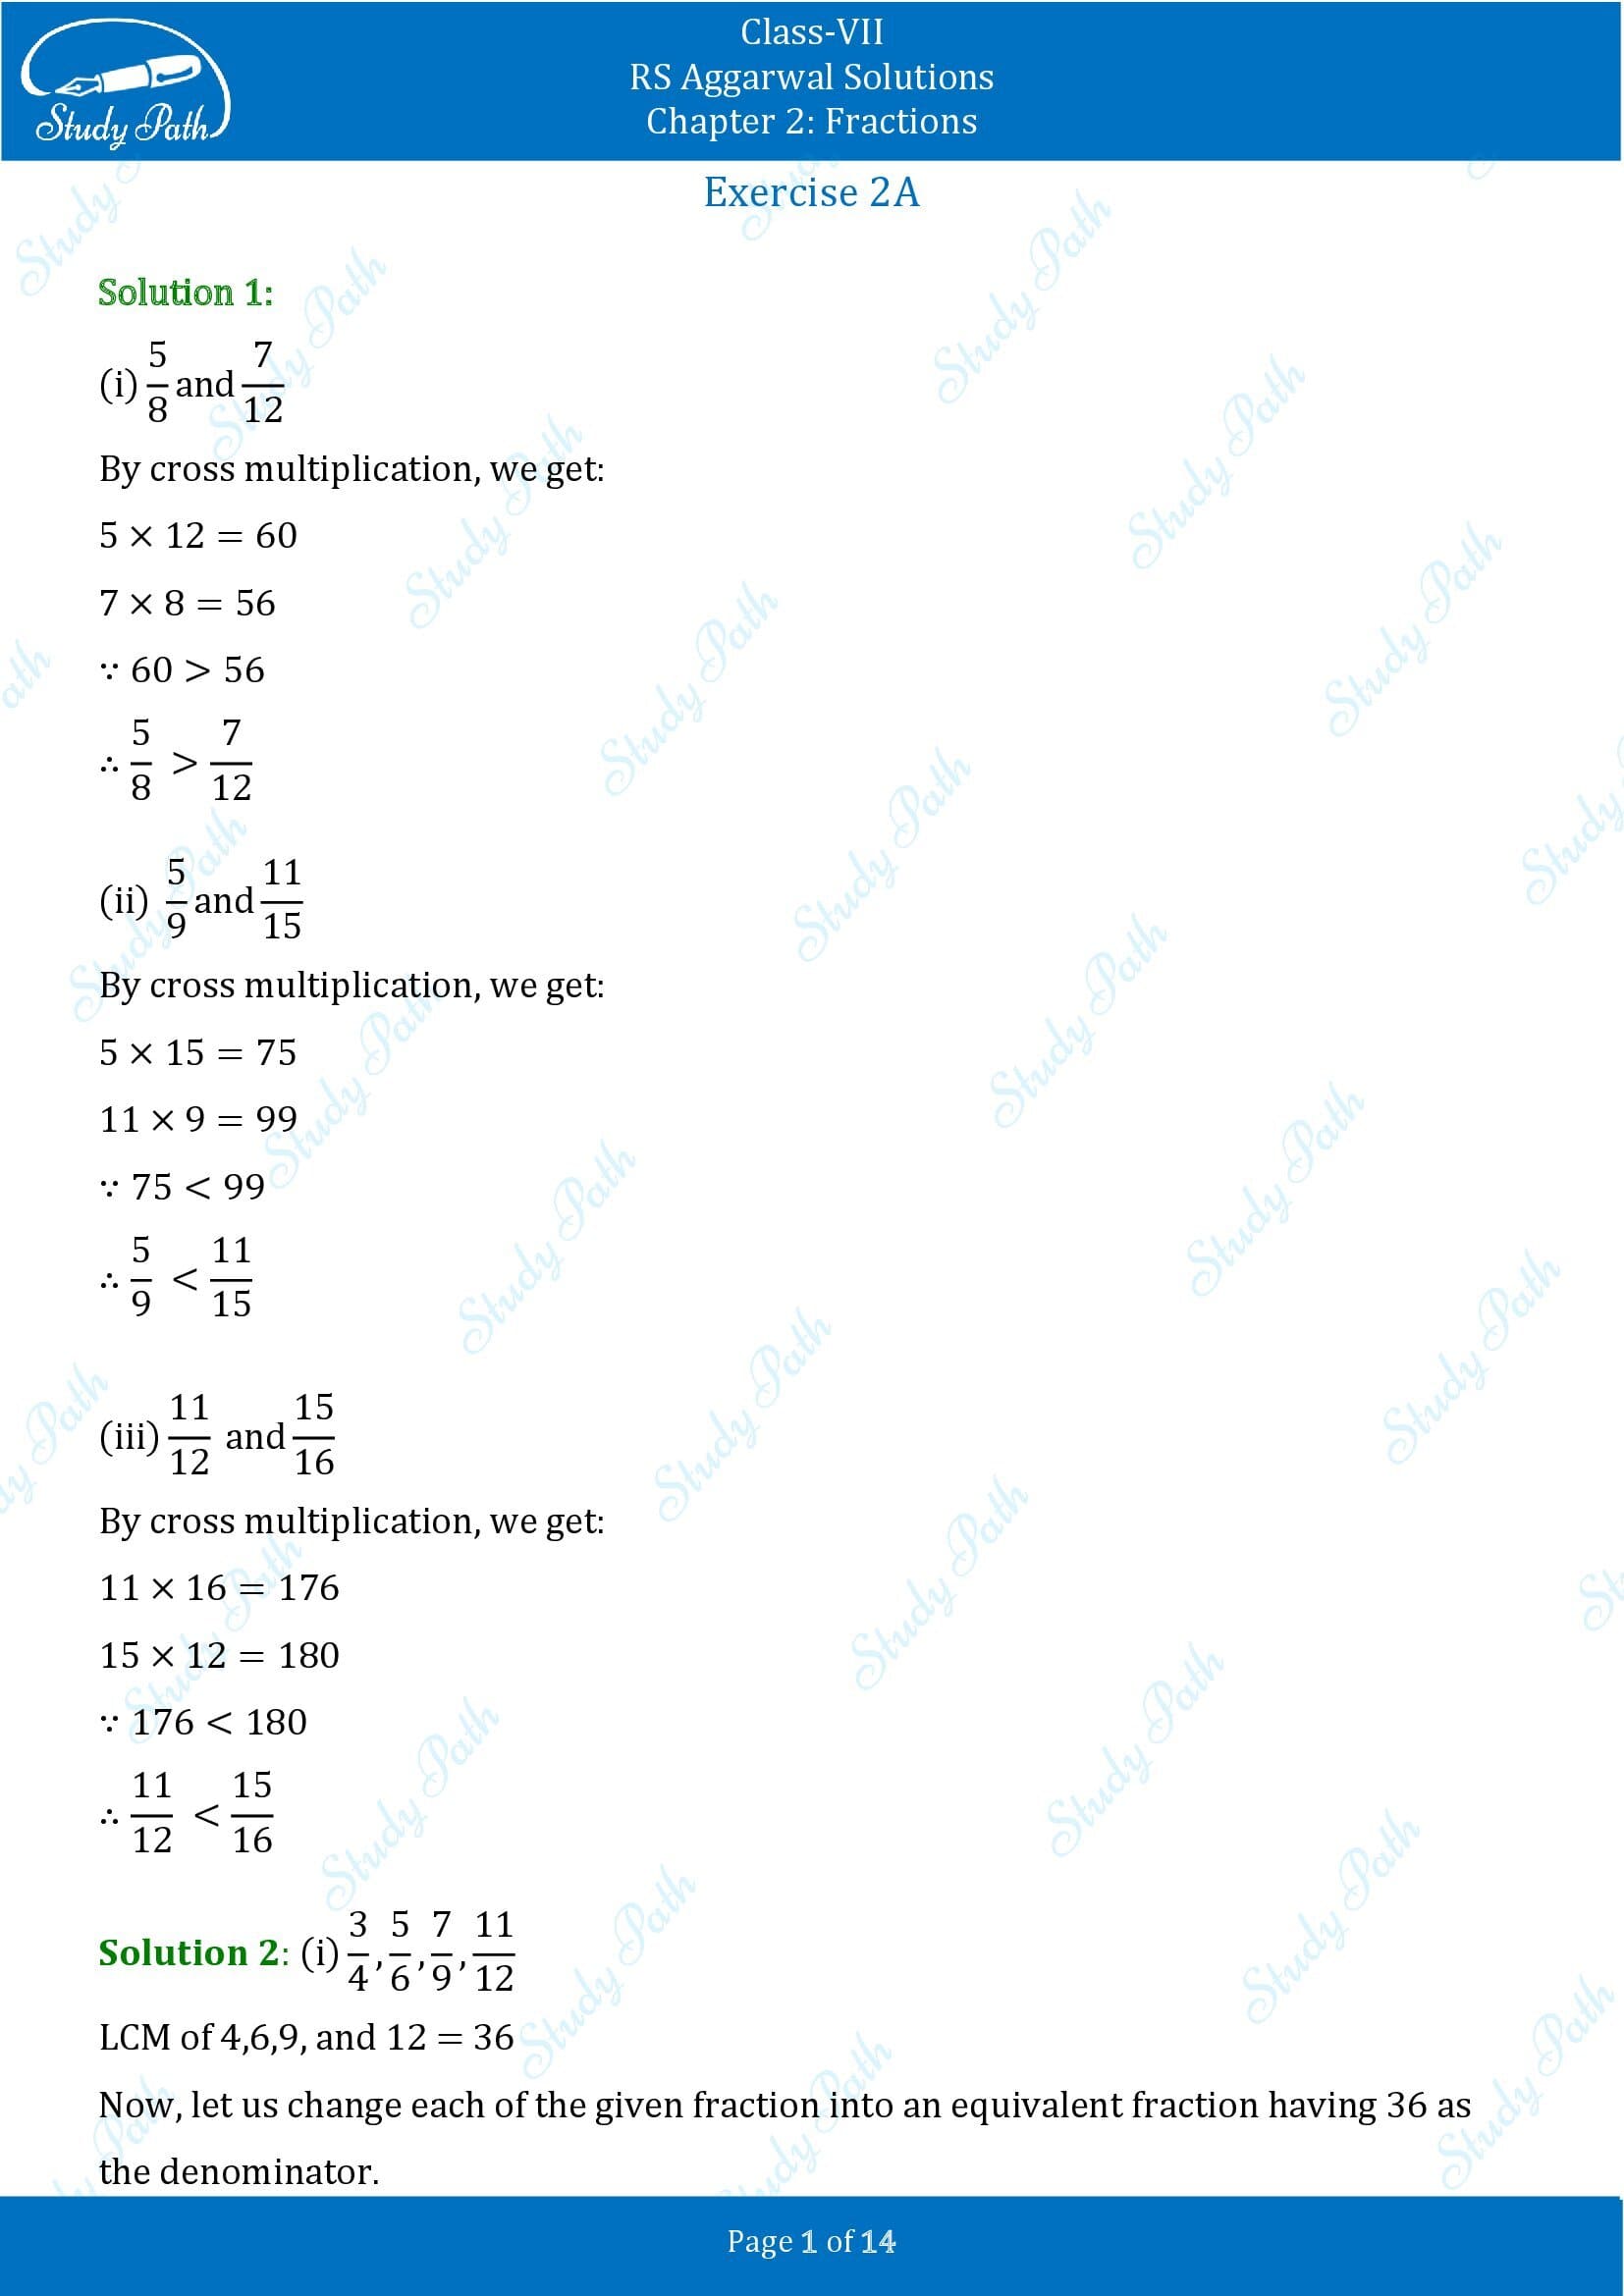 RS Aggarwal Solutions Class 7 Chapter 2 Fractions Exercise 2A 00001